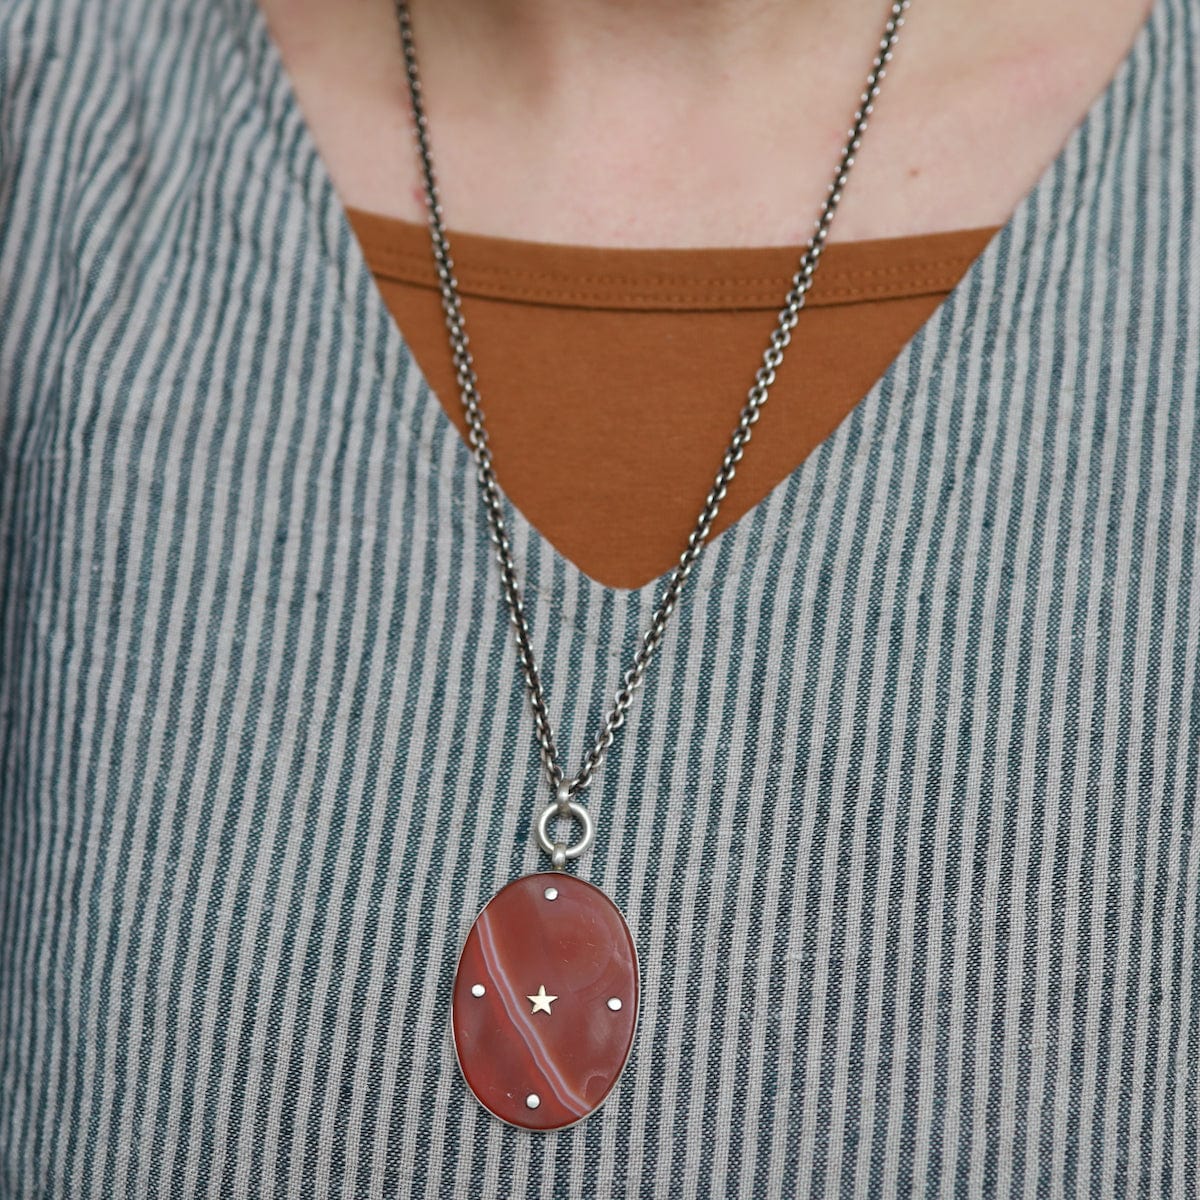 NKL Large Oval Banded Carnelian Pendant Necklace with Gold Star